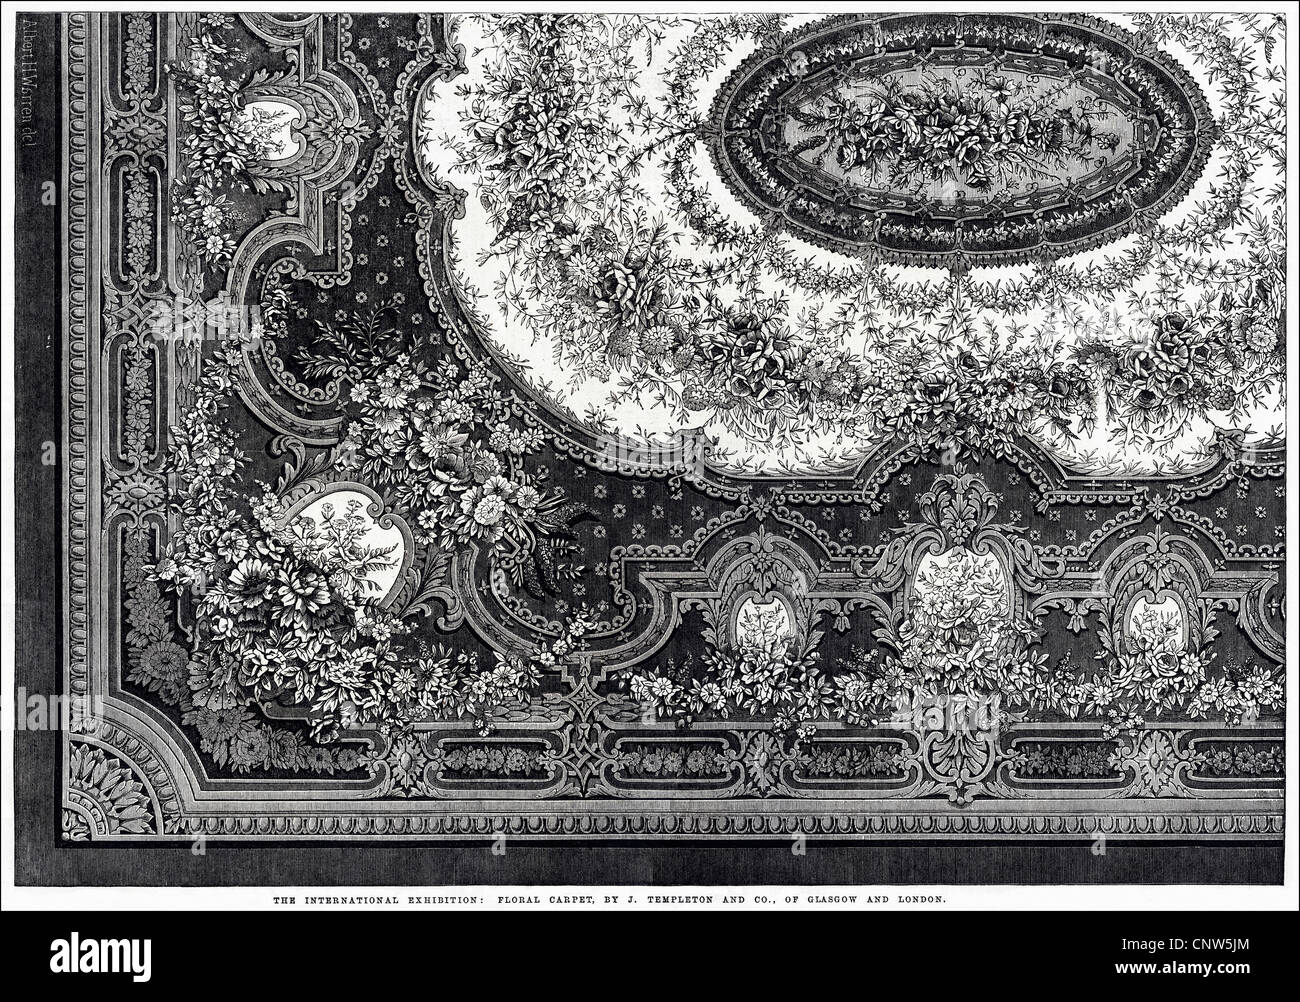 Floral carpet by J. Templeton and Co of Glasgow exhibited at The International Exhibition South Kensington London. Victorian engraving dated 12th July 1862 Stock Photo